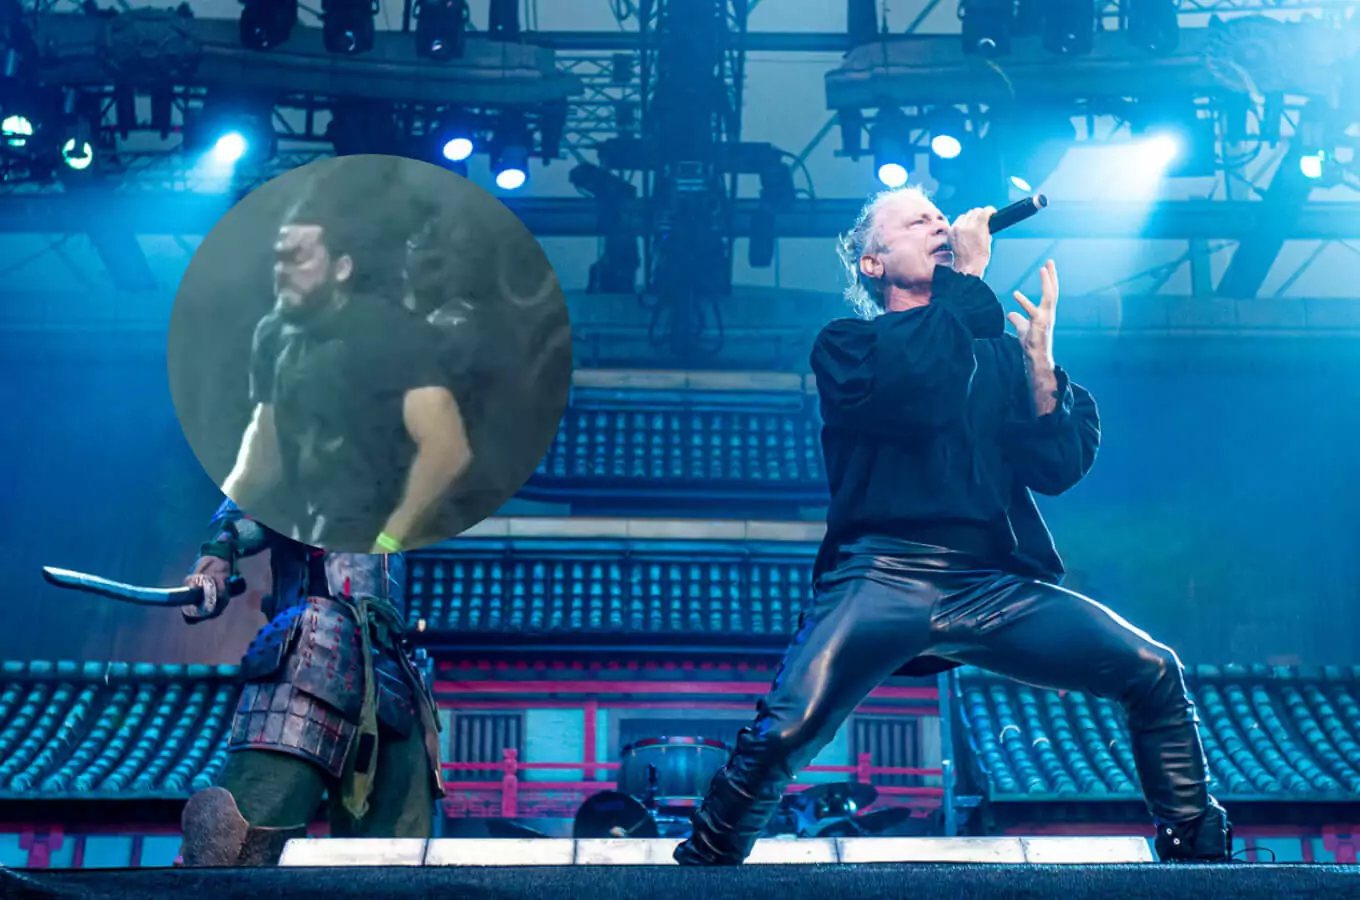 See Iron Maiden frontman Bruce Dickinson kicked off fan from the stage